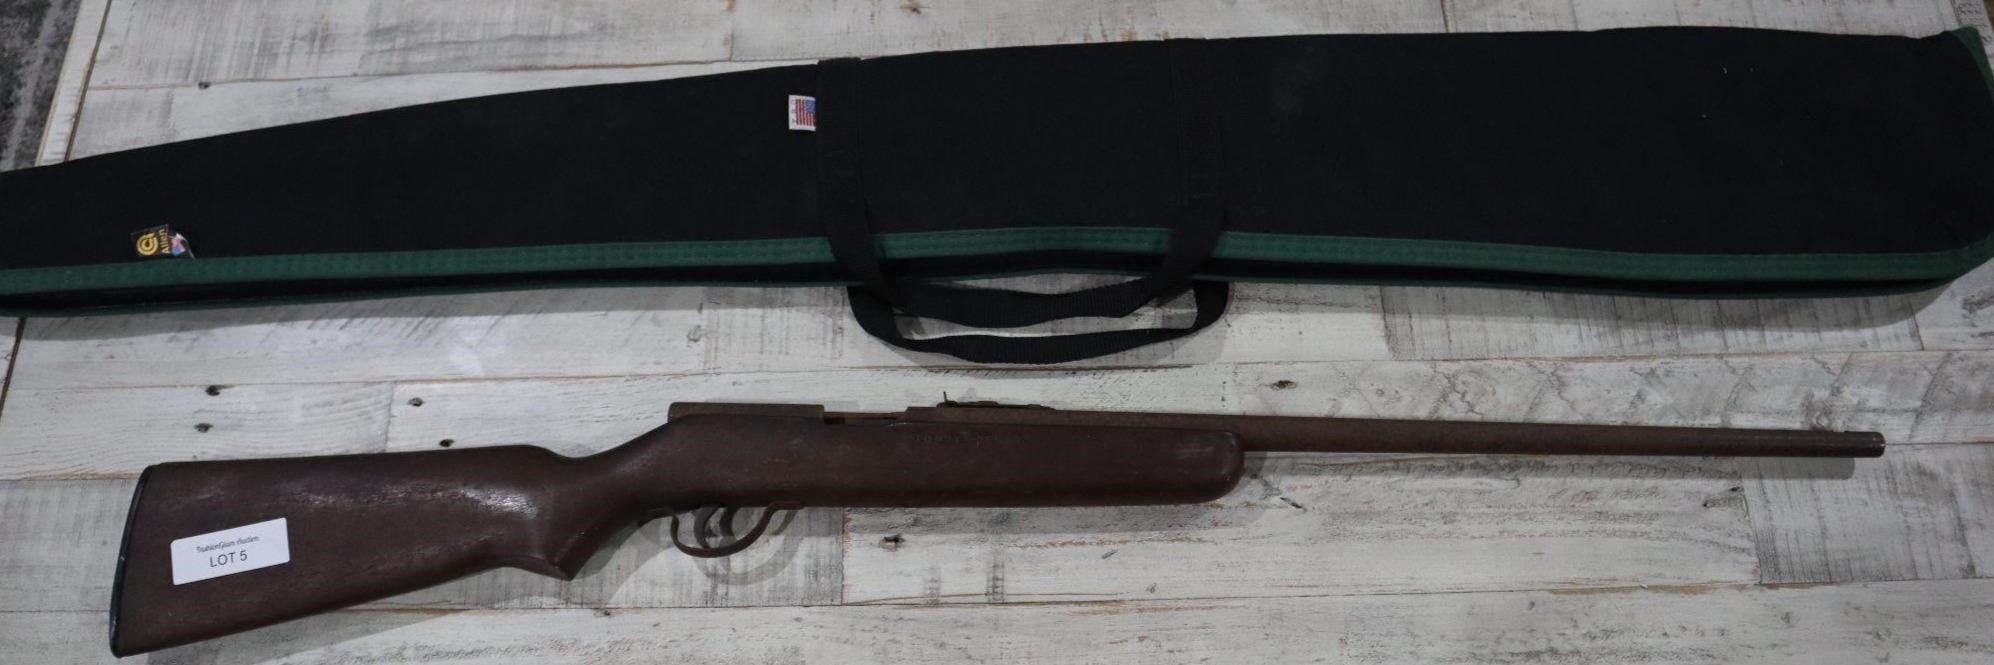 Vintage Winchester repeating arms rifle